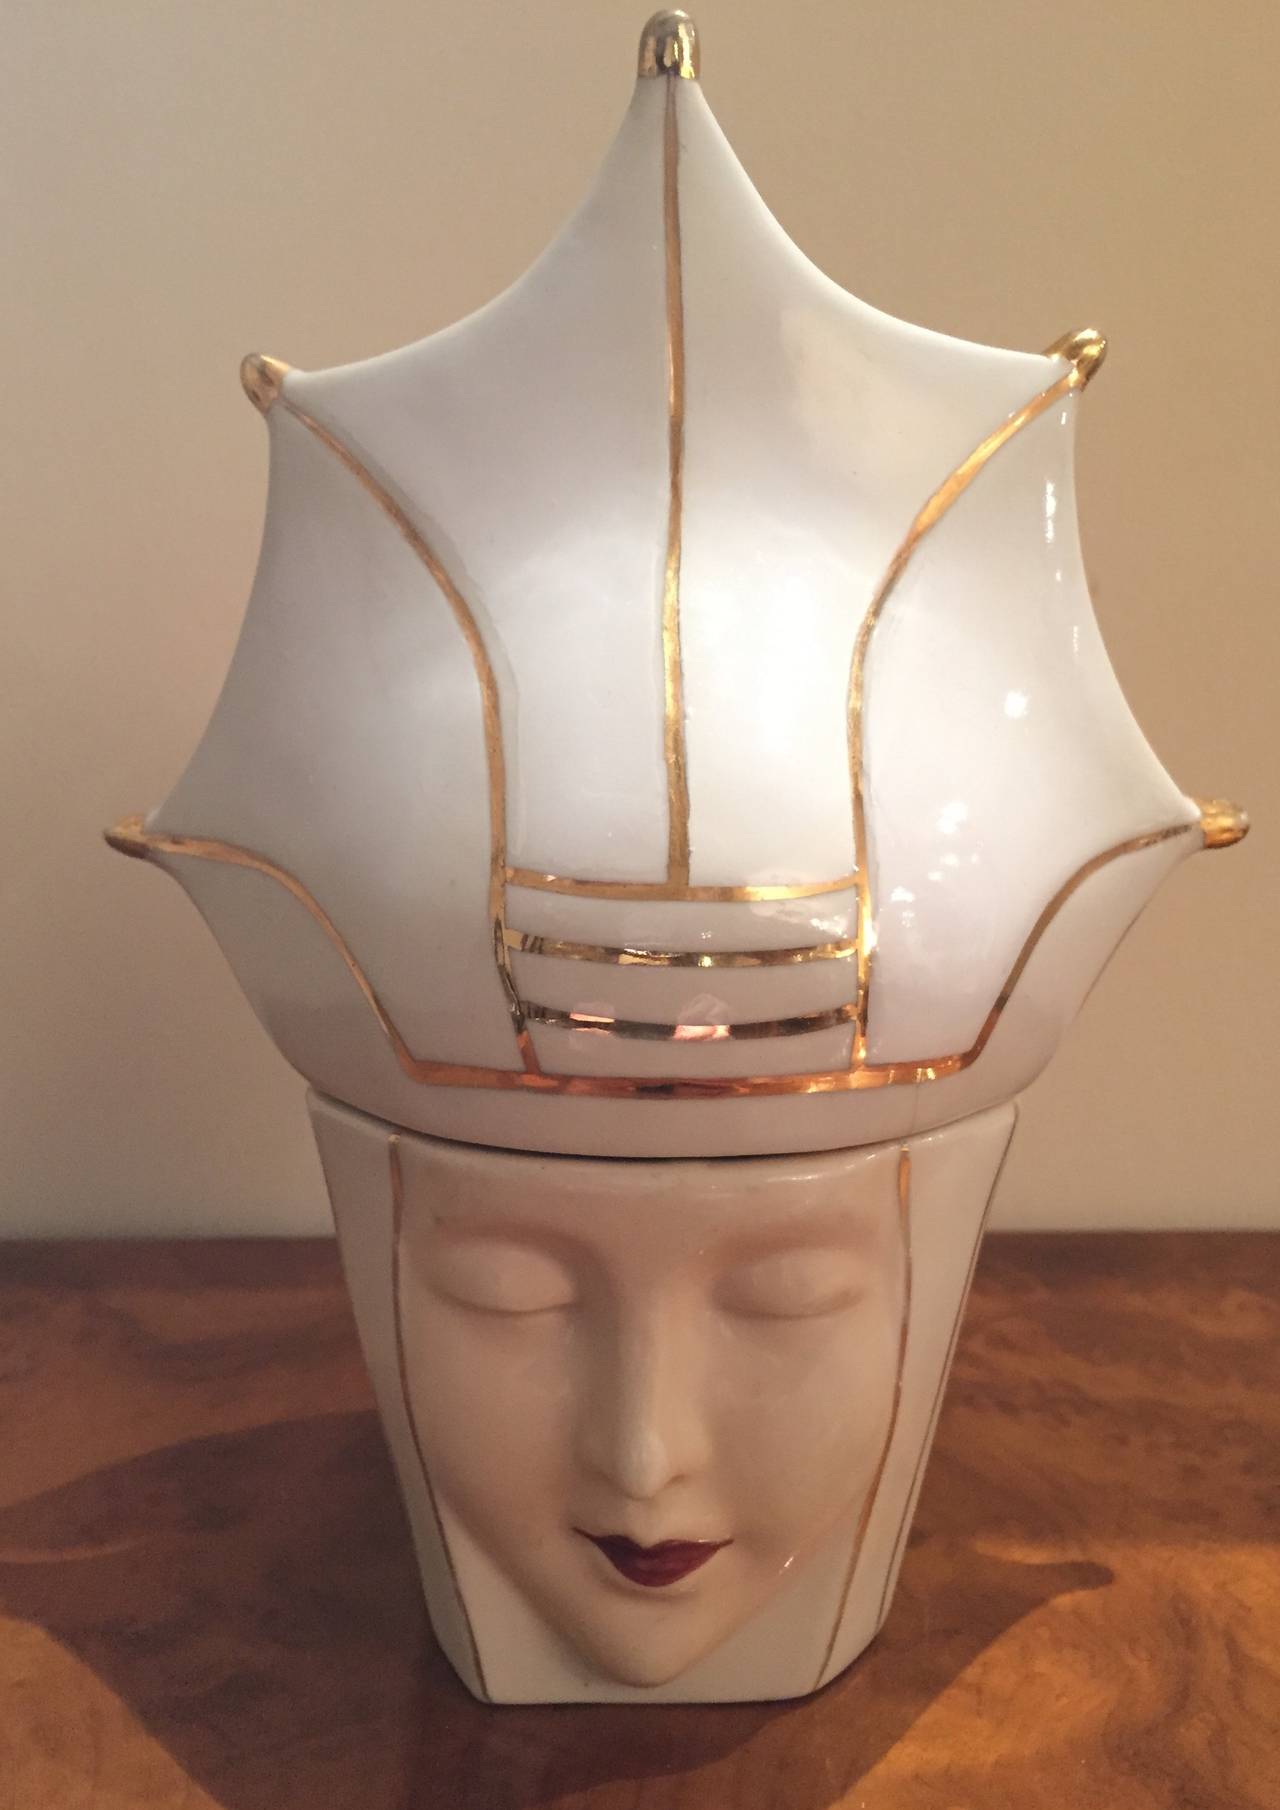 Original condition Robj decorative ceramics bon bon ceramic from the period of 1925-1930. Woman with crown and gold lines. This figure is beautifully rendered with two parts, top and bottom. 
 
Jean Born began his work in 1908 under the name he